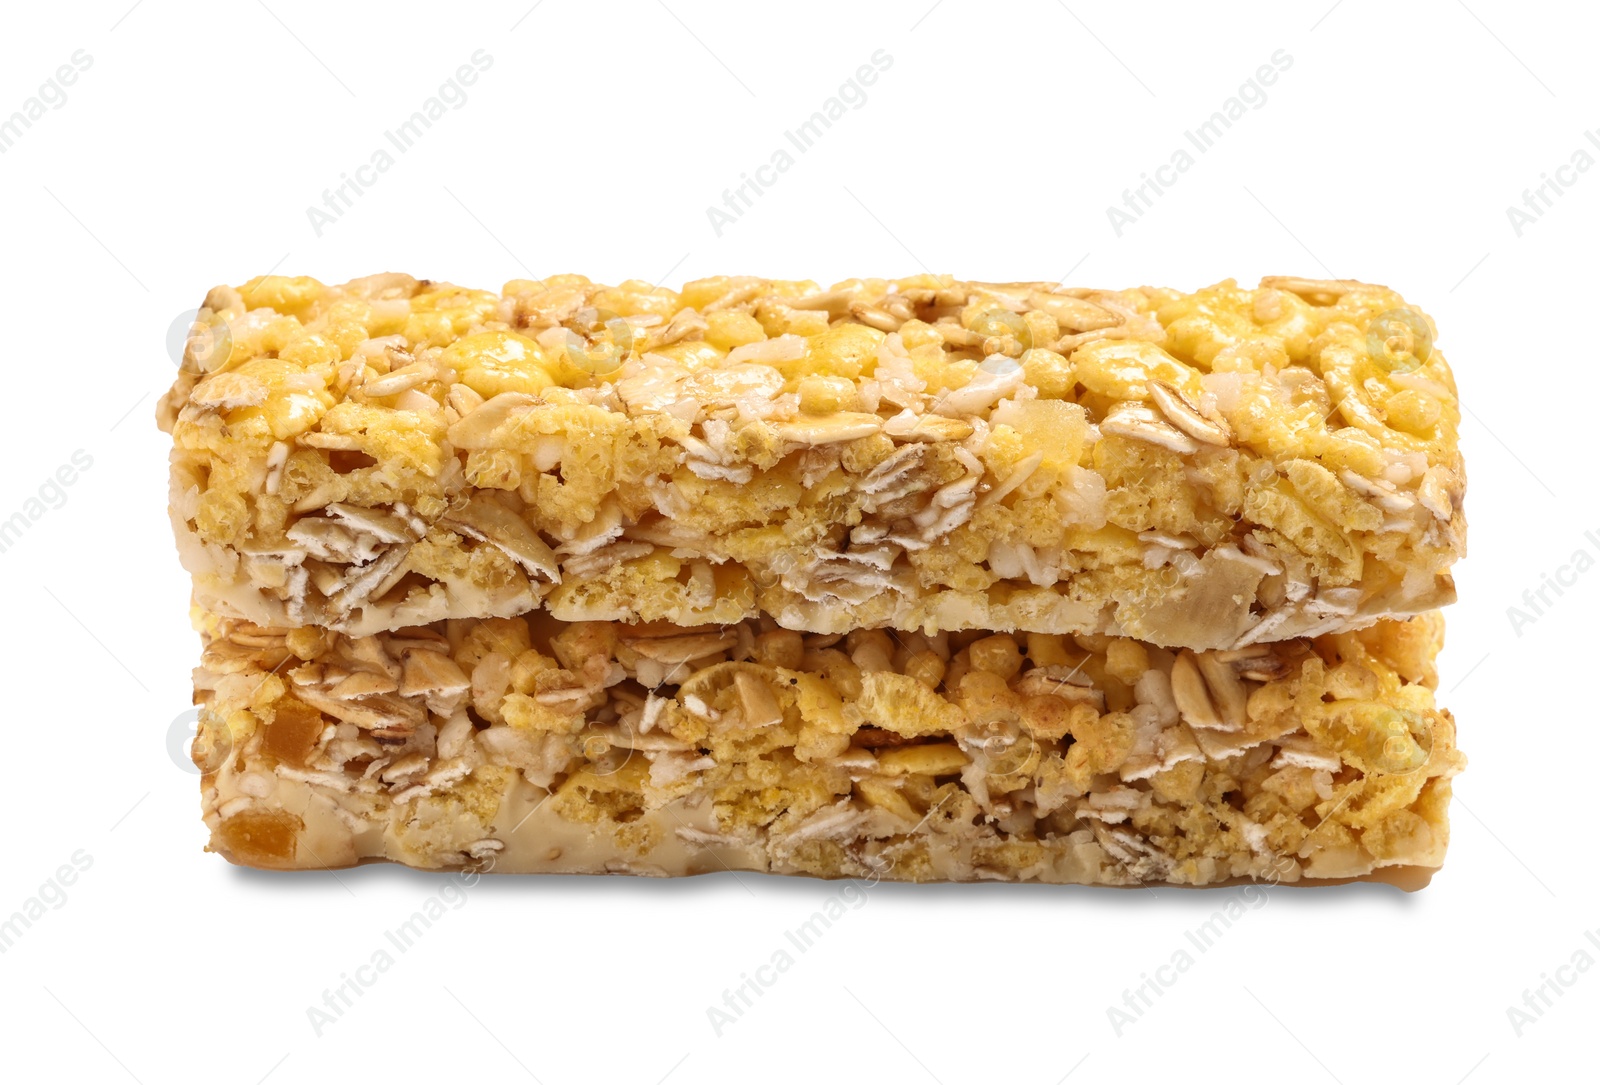 Photo of Two tasty granola bars isolated on white